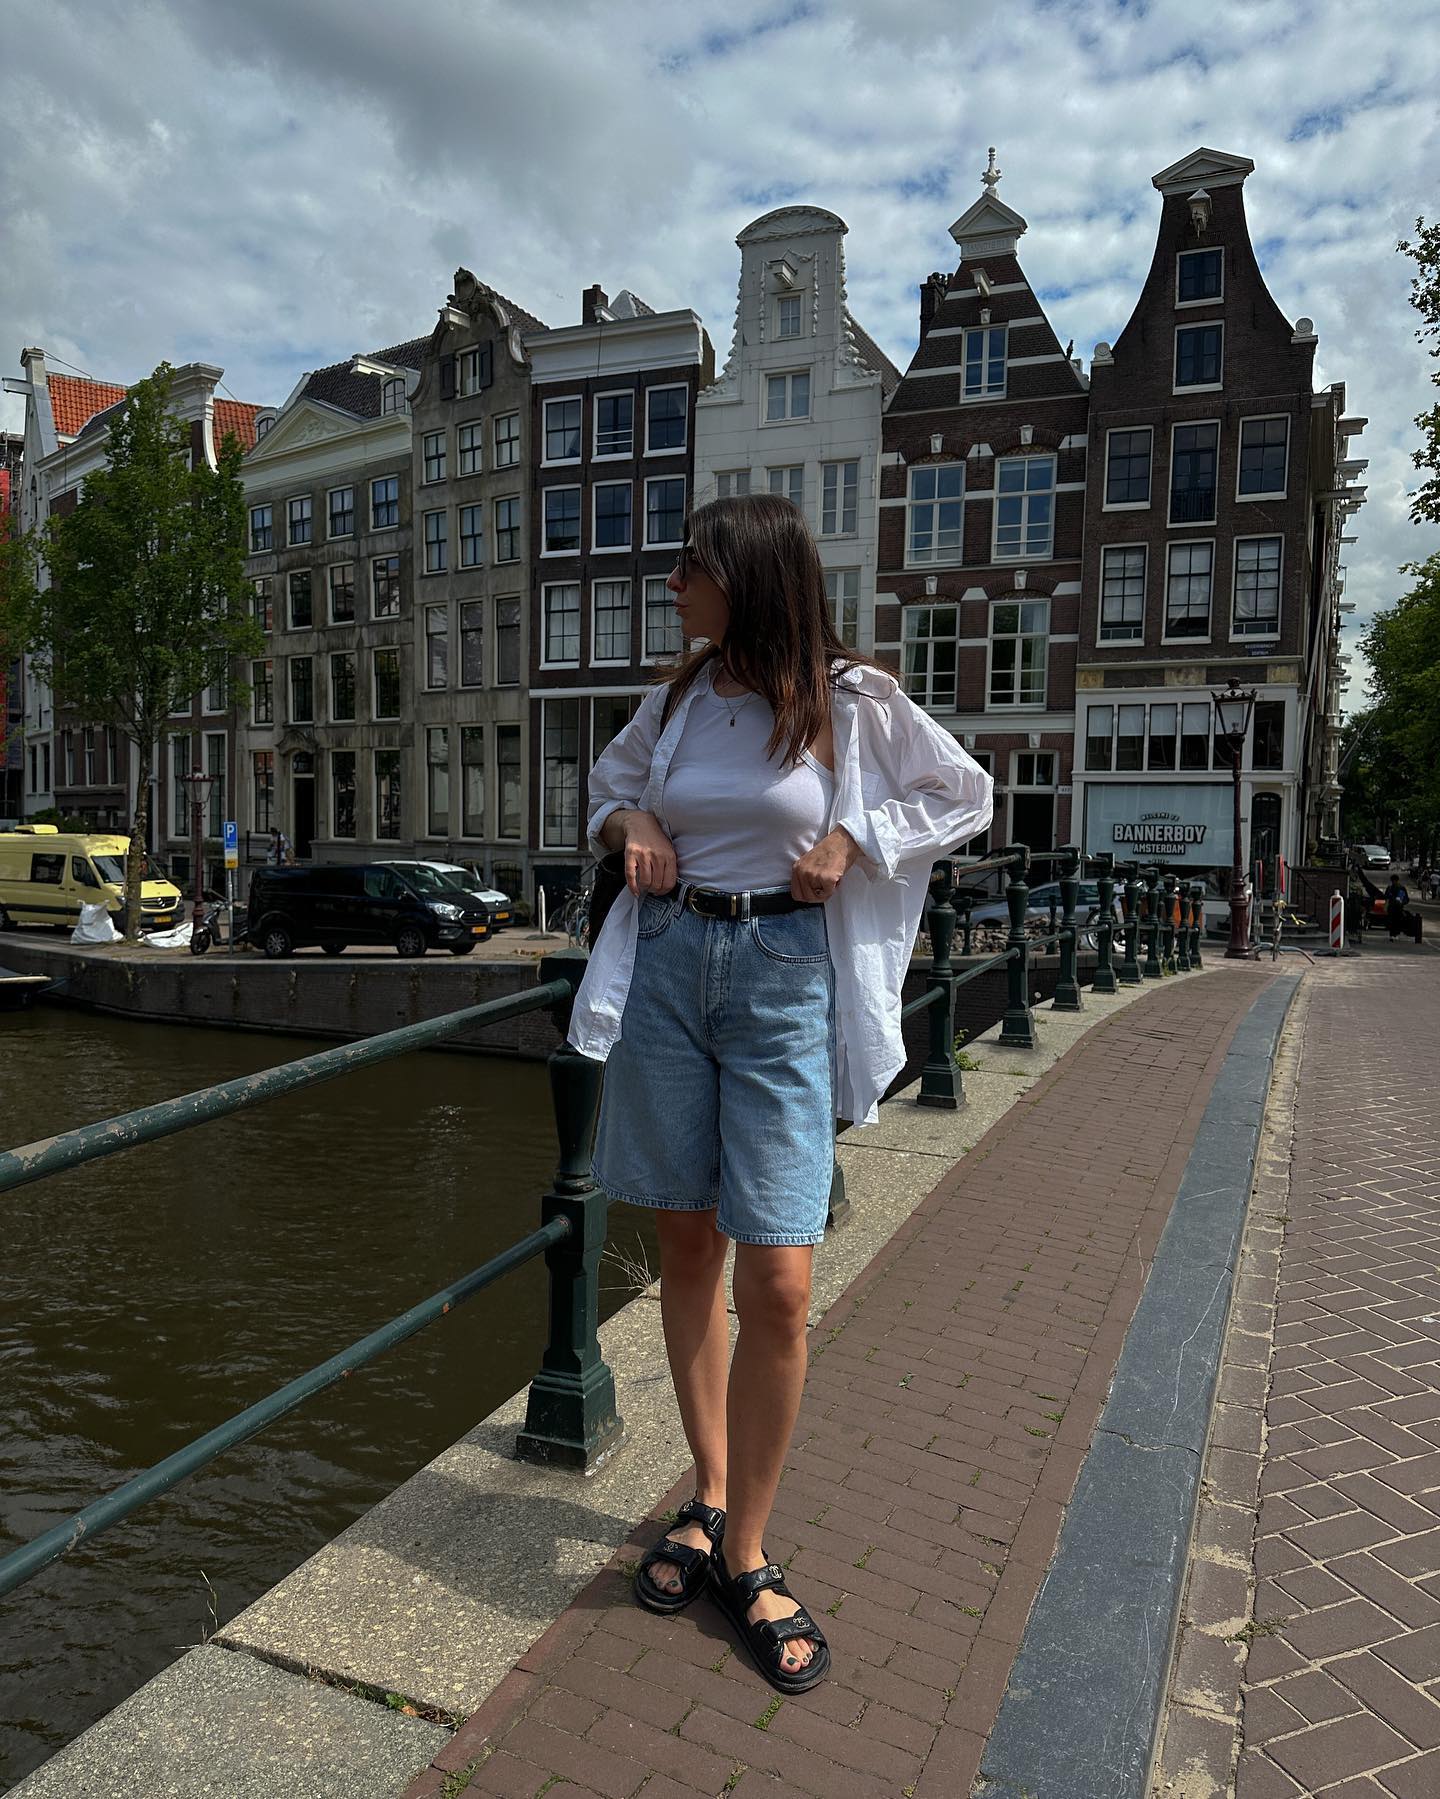 Woman on street wears long denim shorts, white shirt and sandals